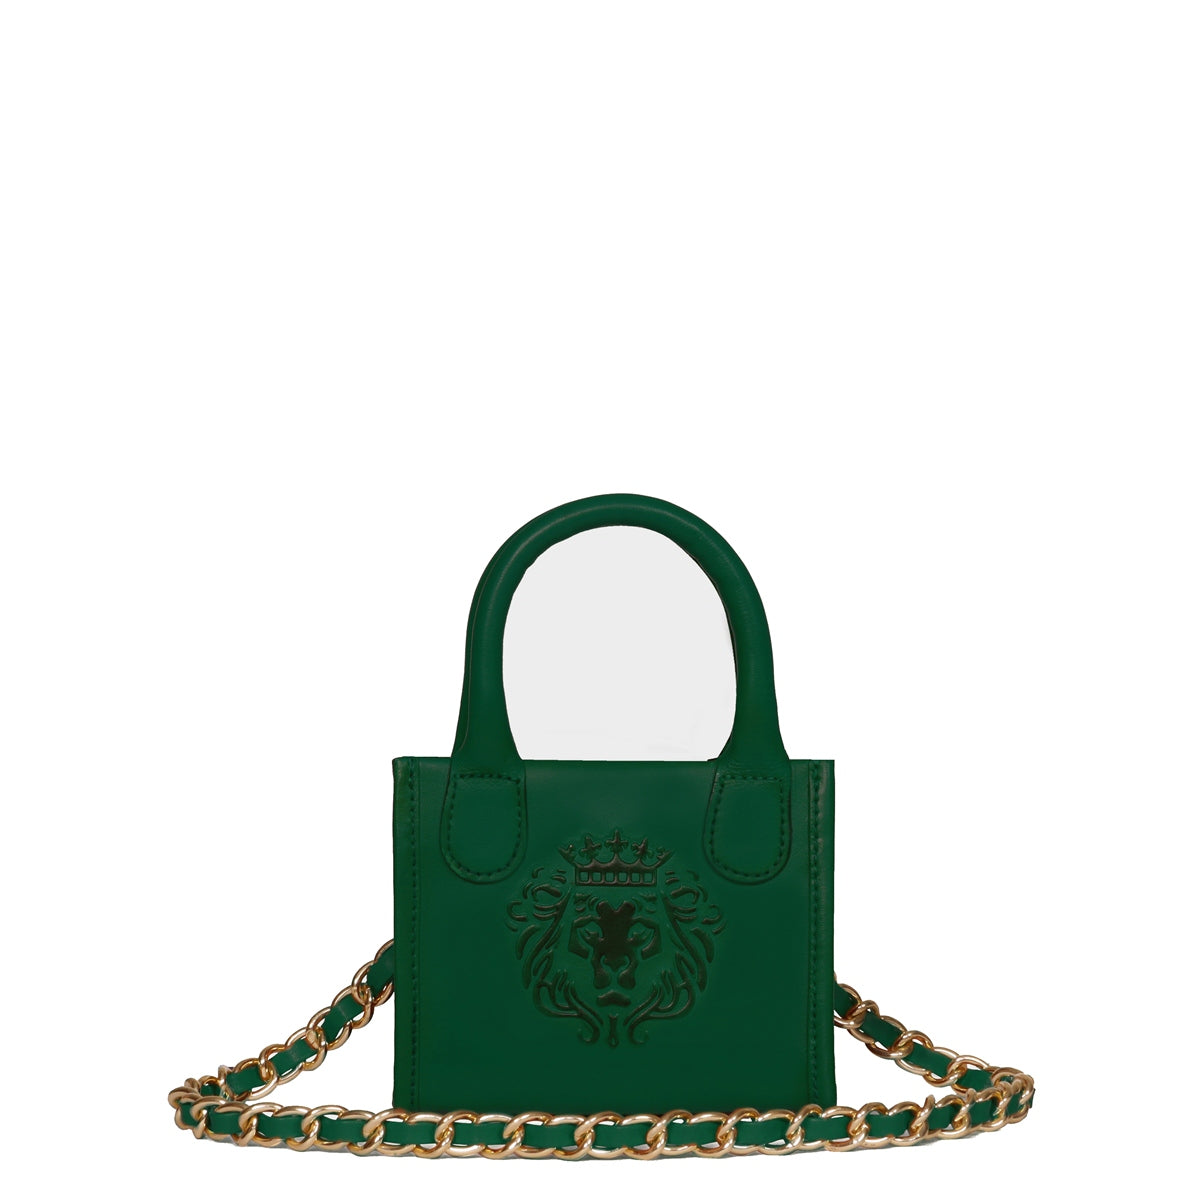 Micro Sized  Hand Bag in Green Genuine Leather